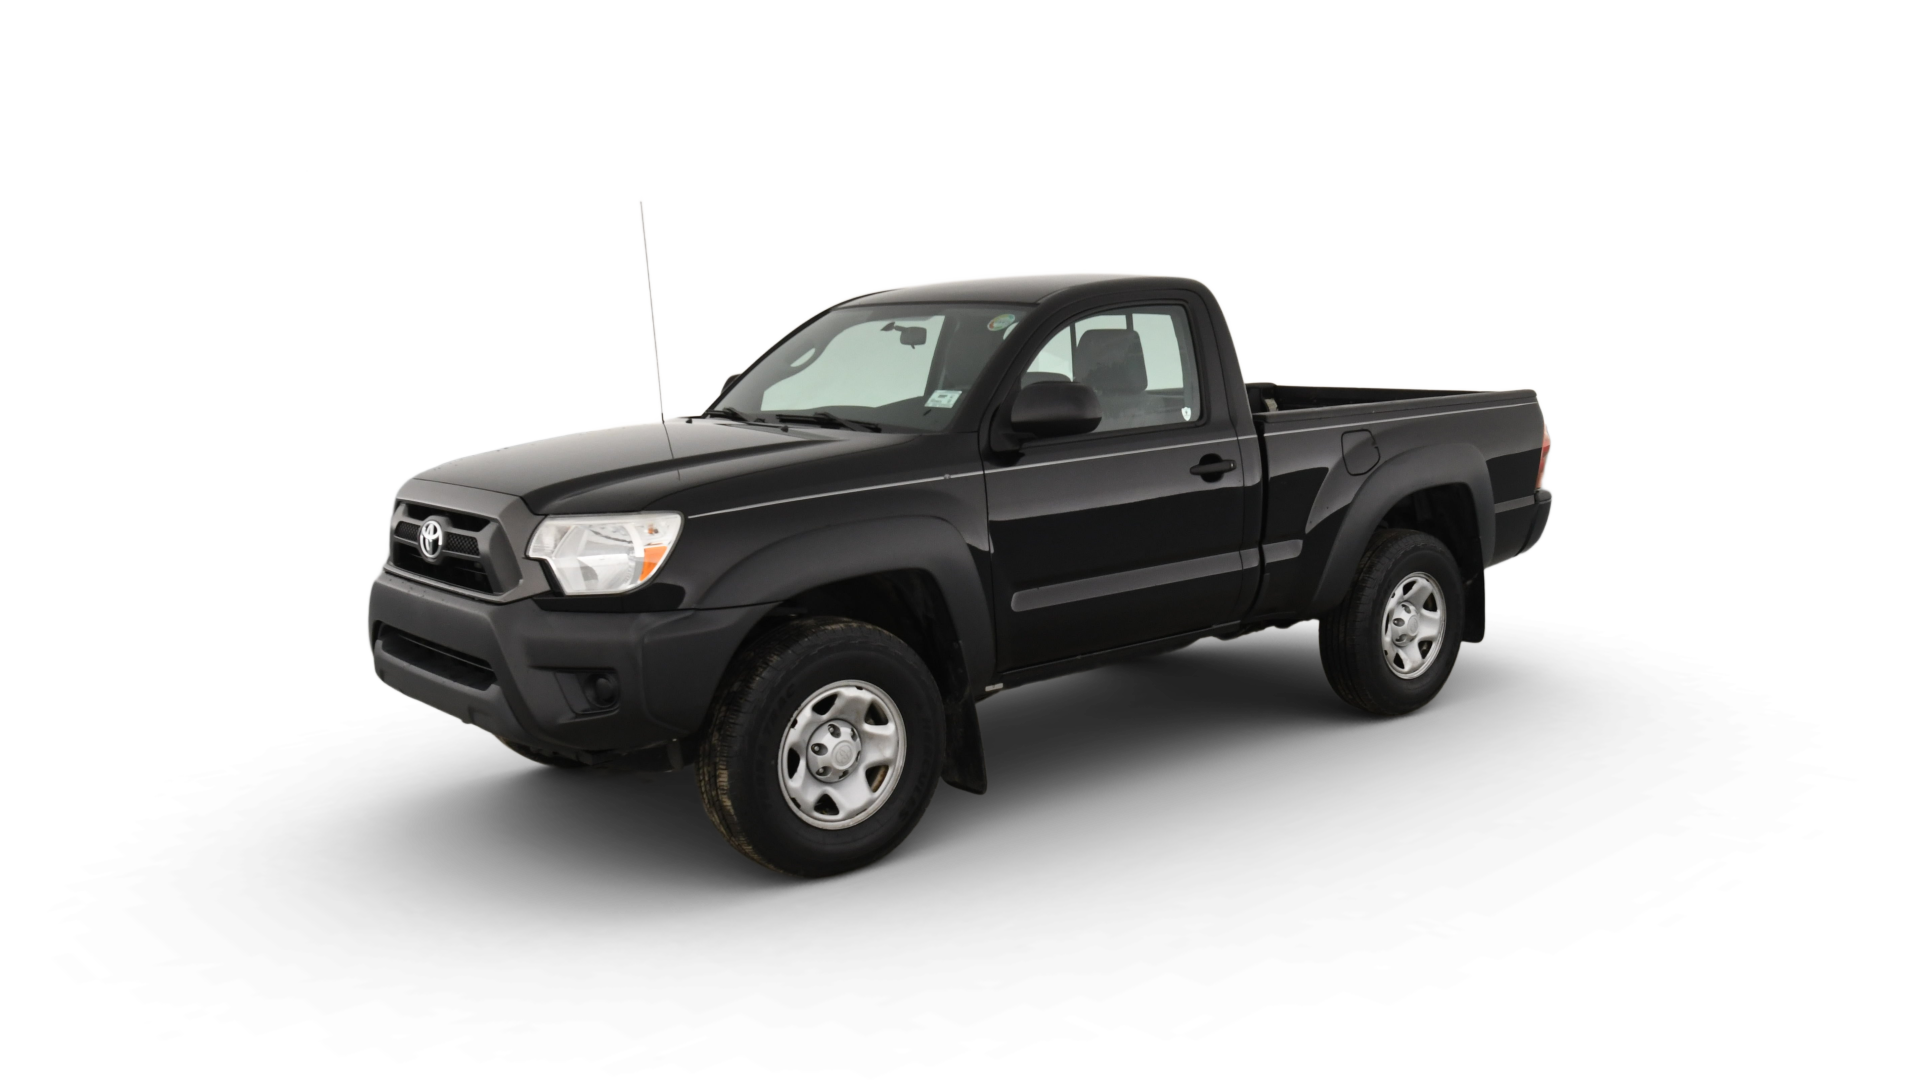 Toyota Tacoma for sale with photos on CARFAX website